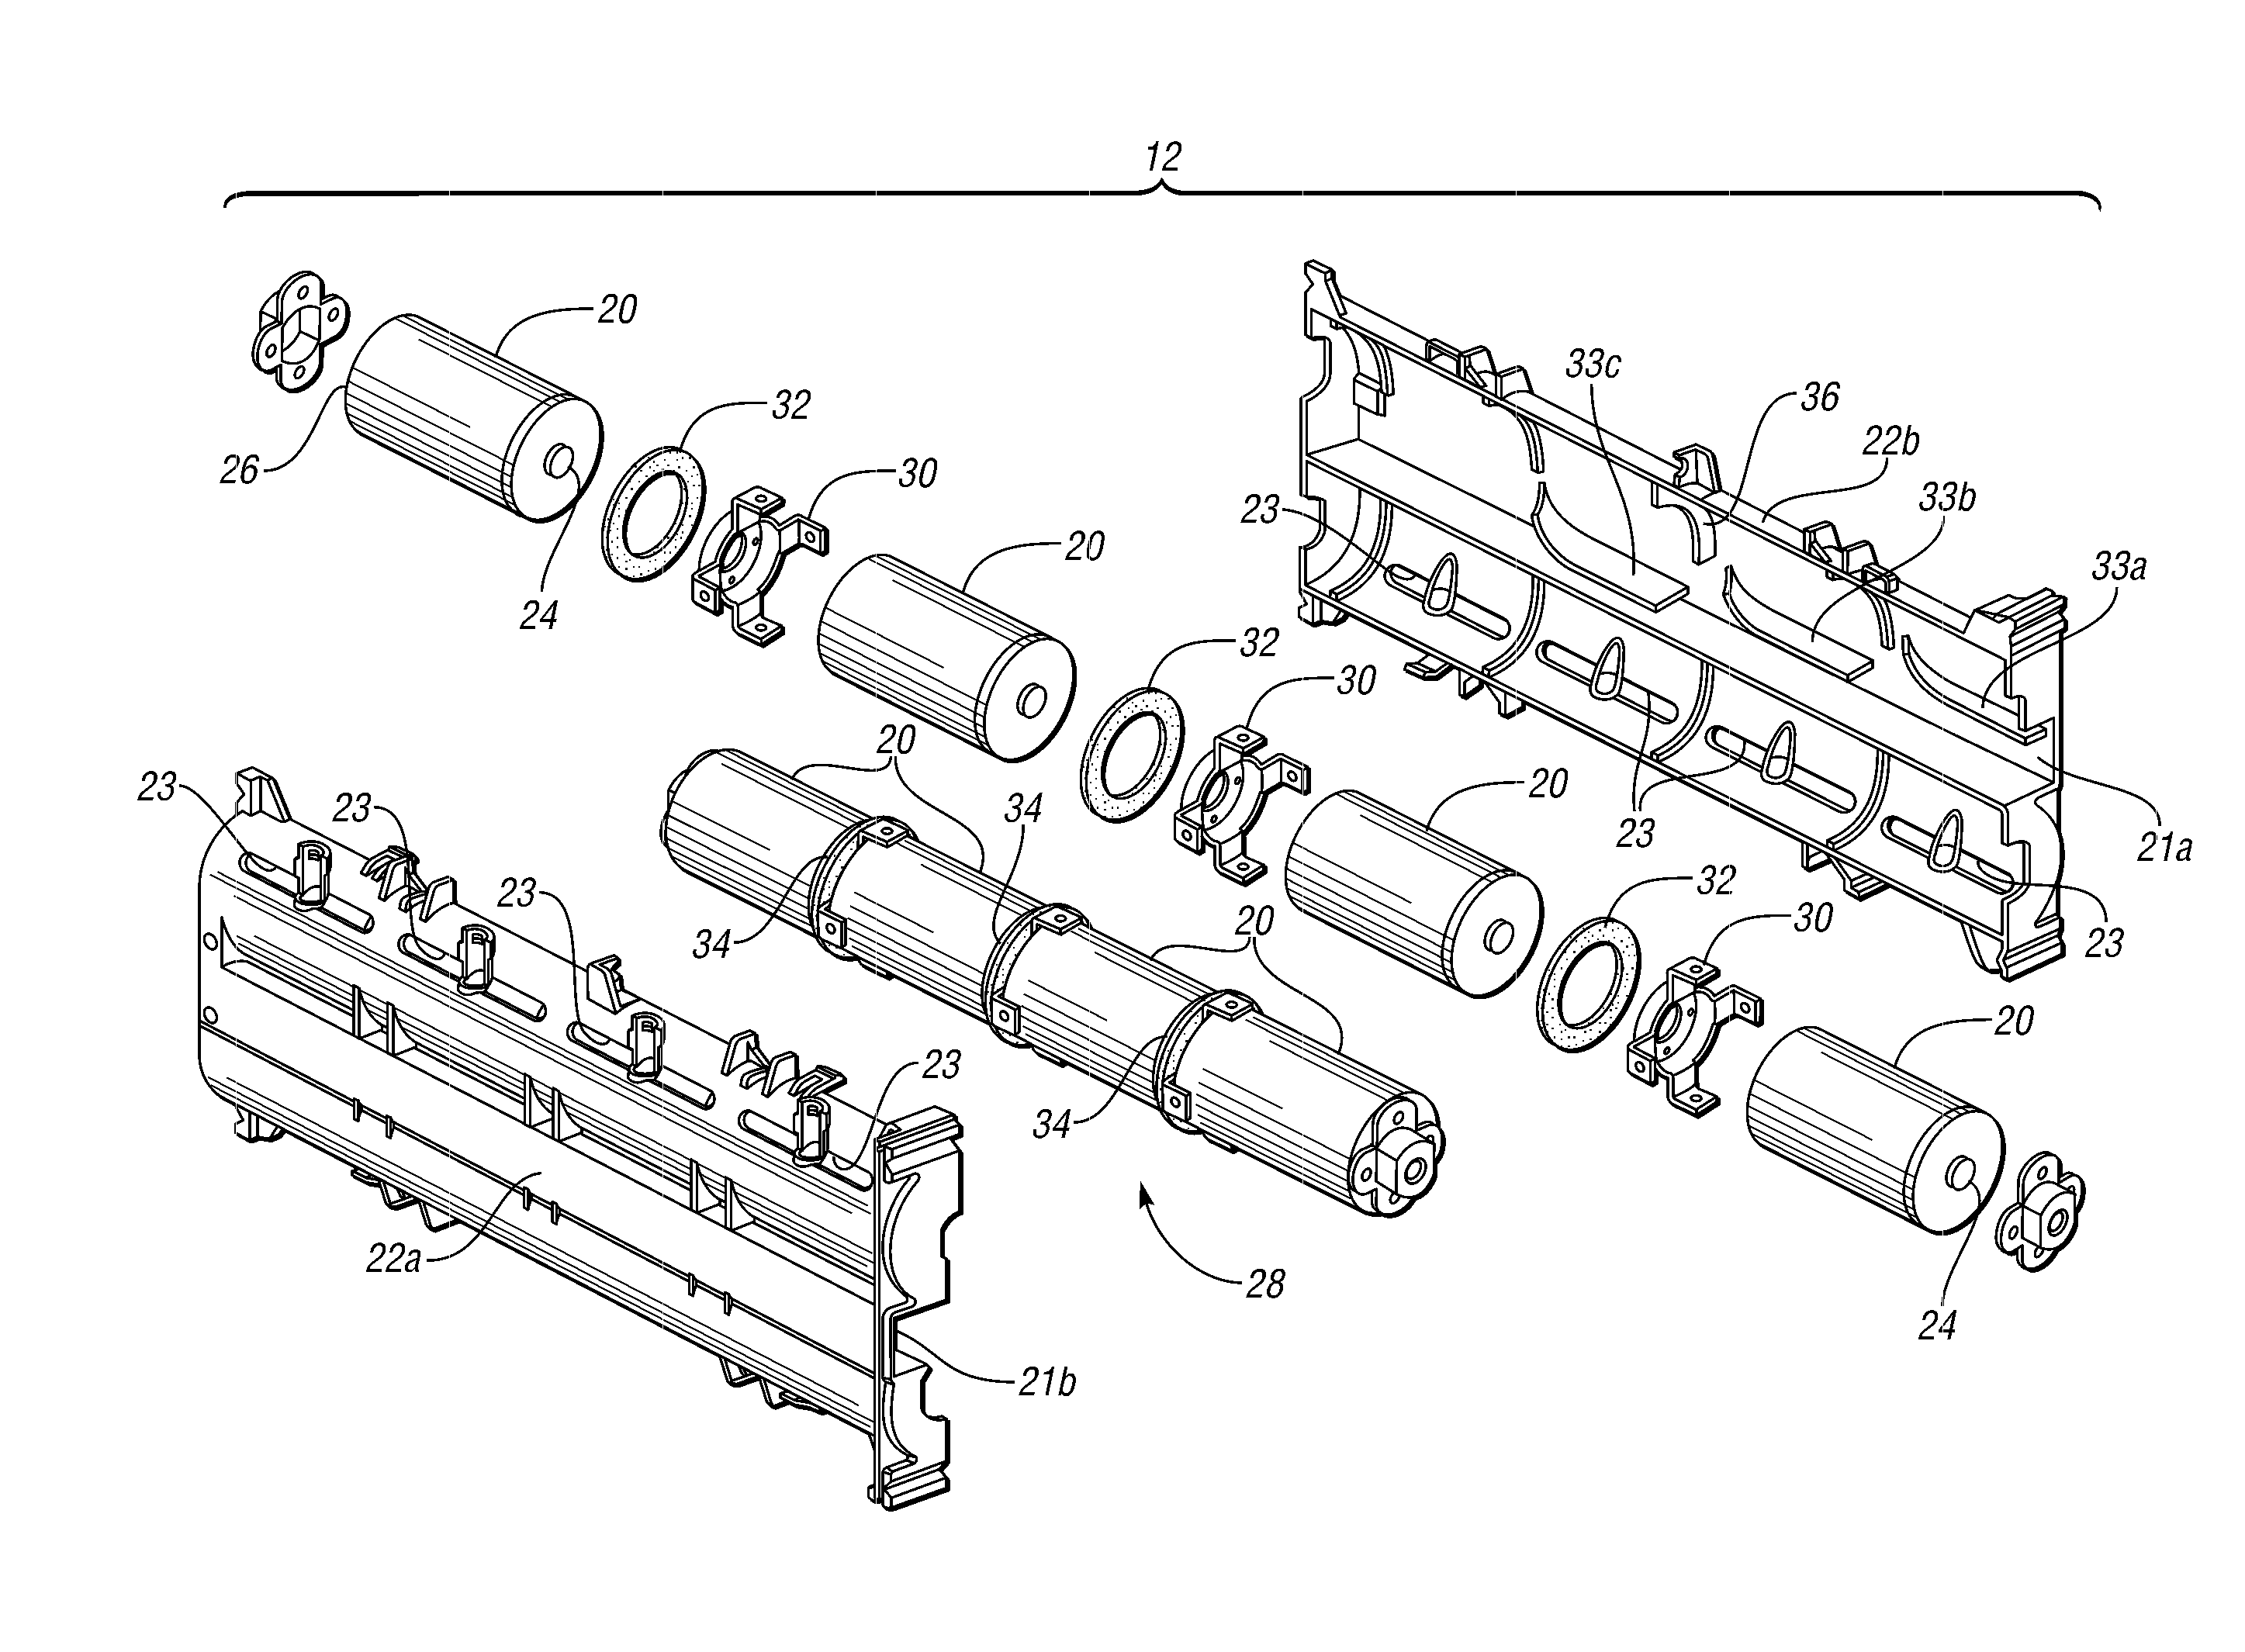 Battery cover assembly